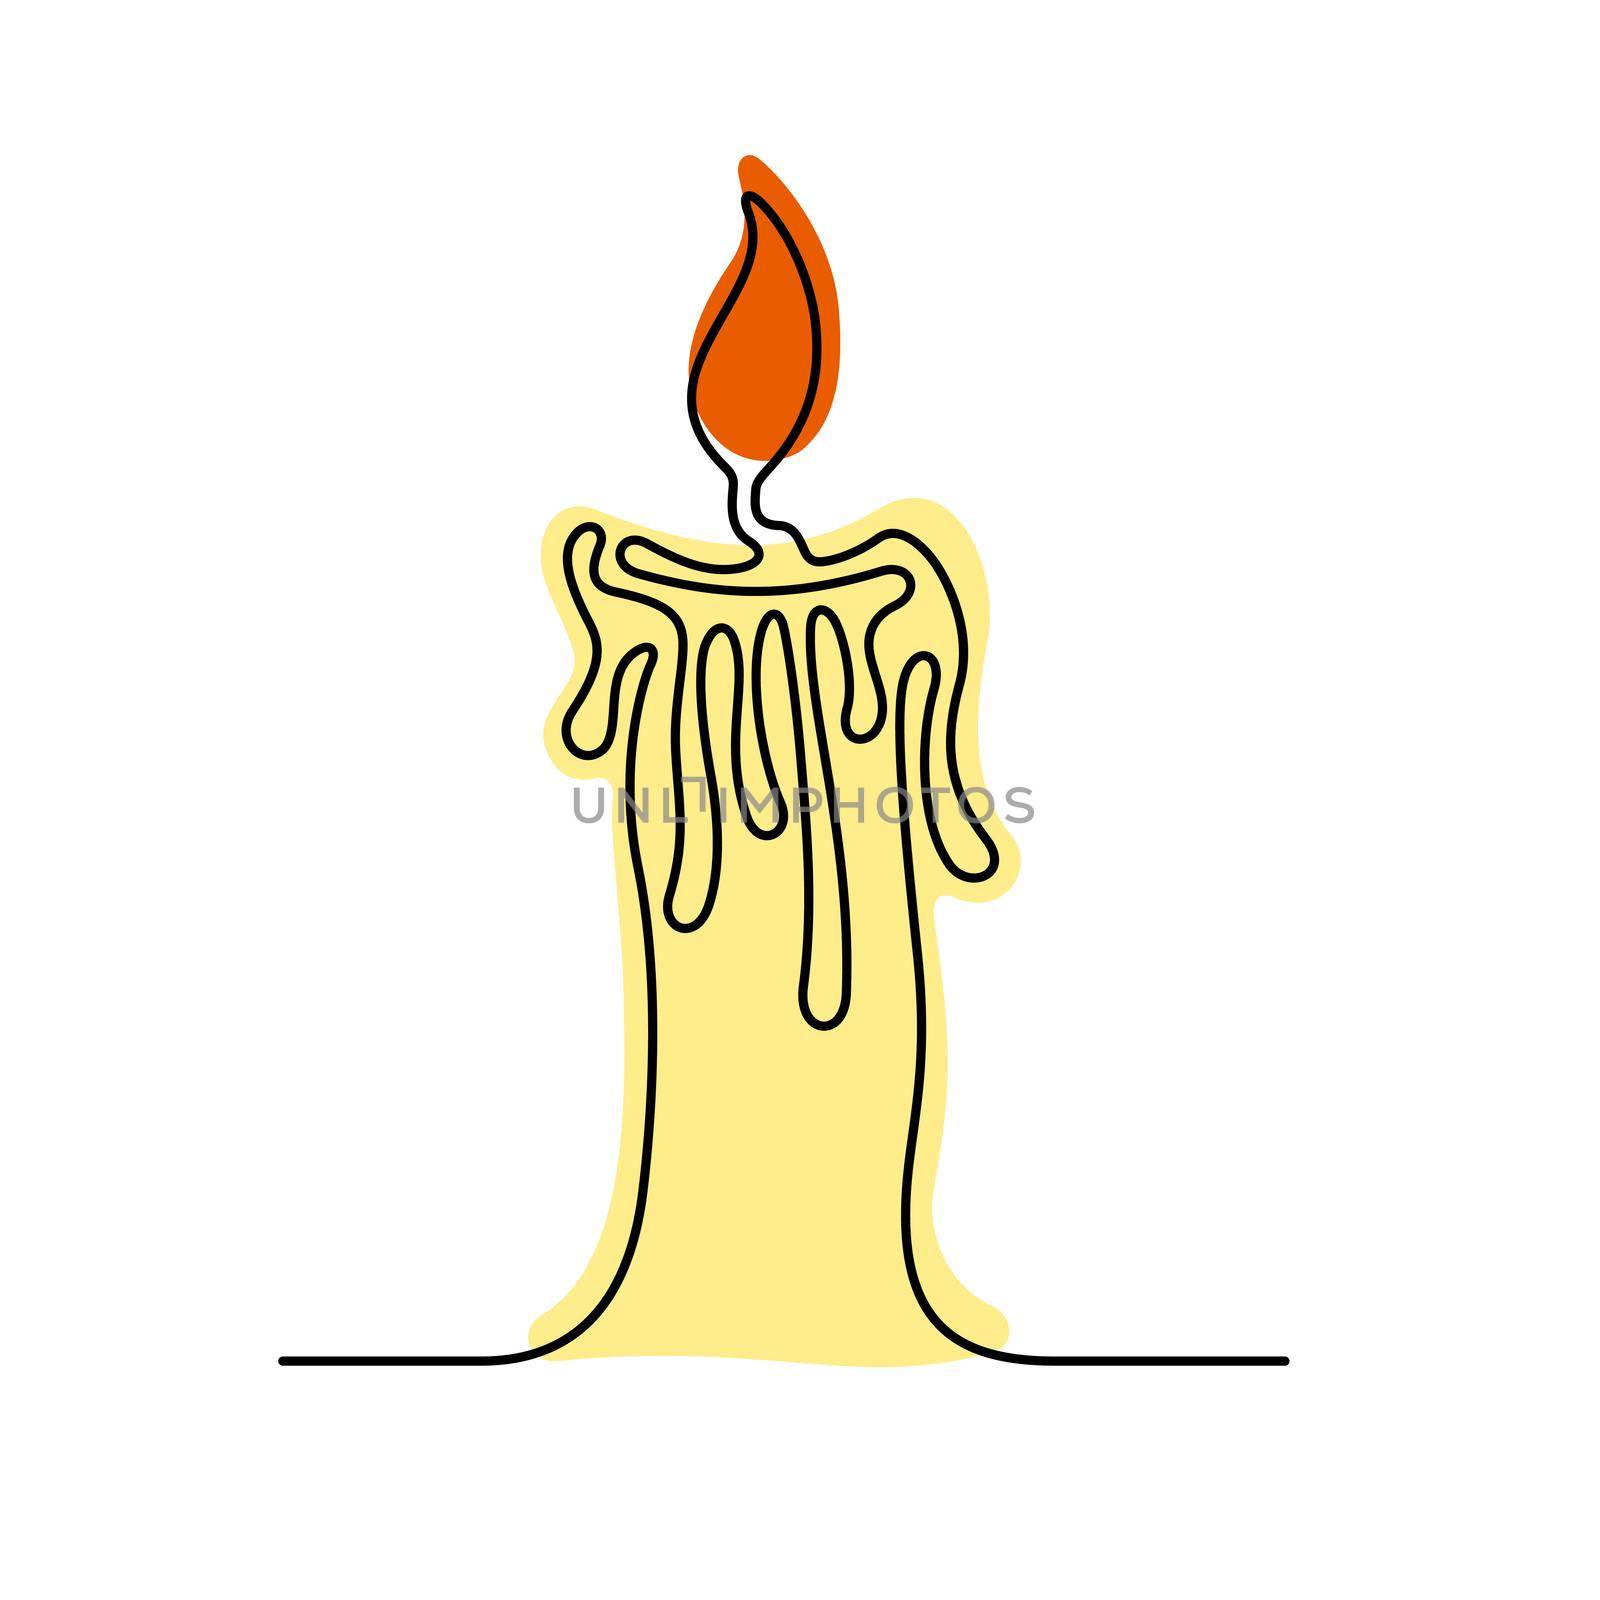 Candle beautiful minimal continuous line. Christmas design for cards, posters, banners. Isolated vector illustration. by Pyromaster